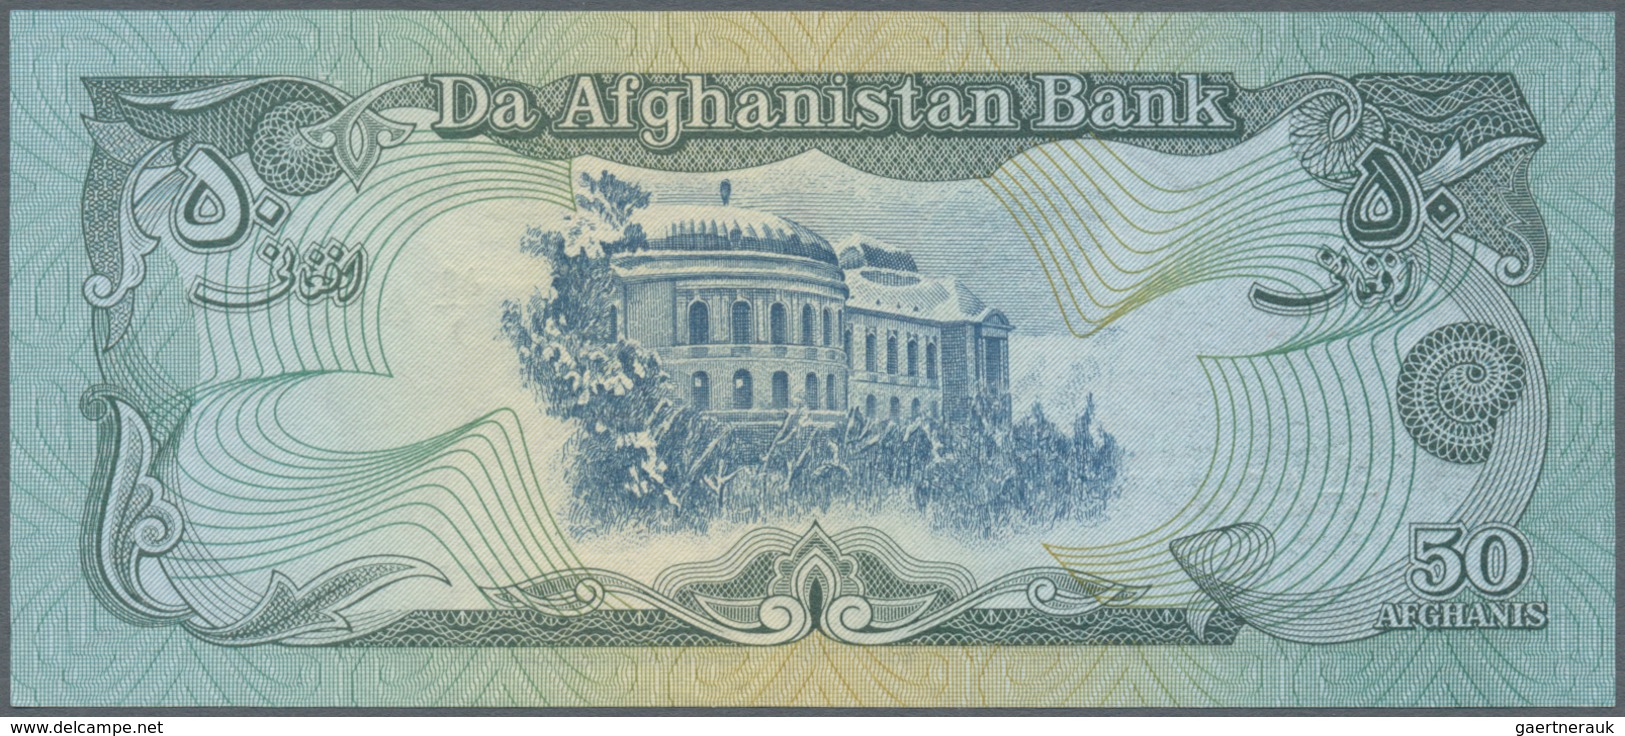 Afghanistan: set of 18 banknotes containing the following Pick numbers: 8, 22, 28, 37, 38, 49, 50, 5